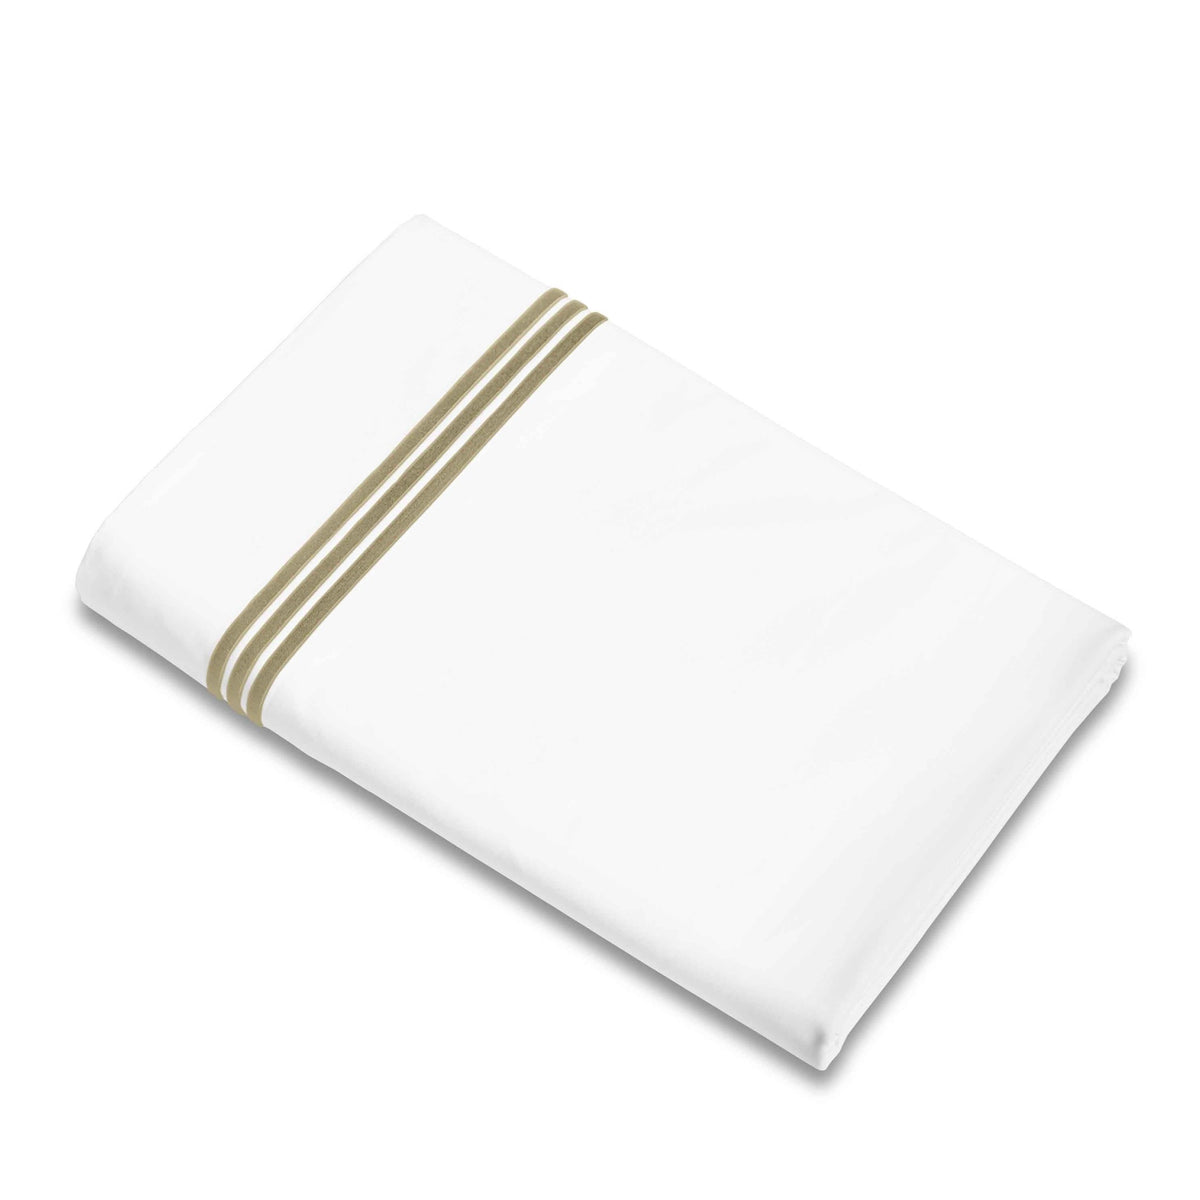 Flat Sheet of Signoria Platinum Percale Bedding in White/Coffee Color